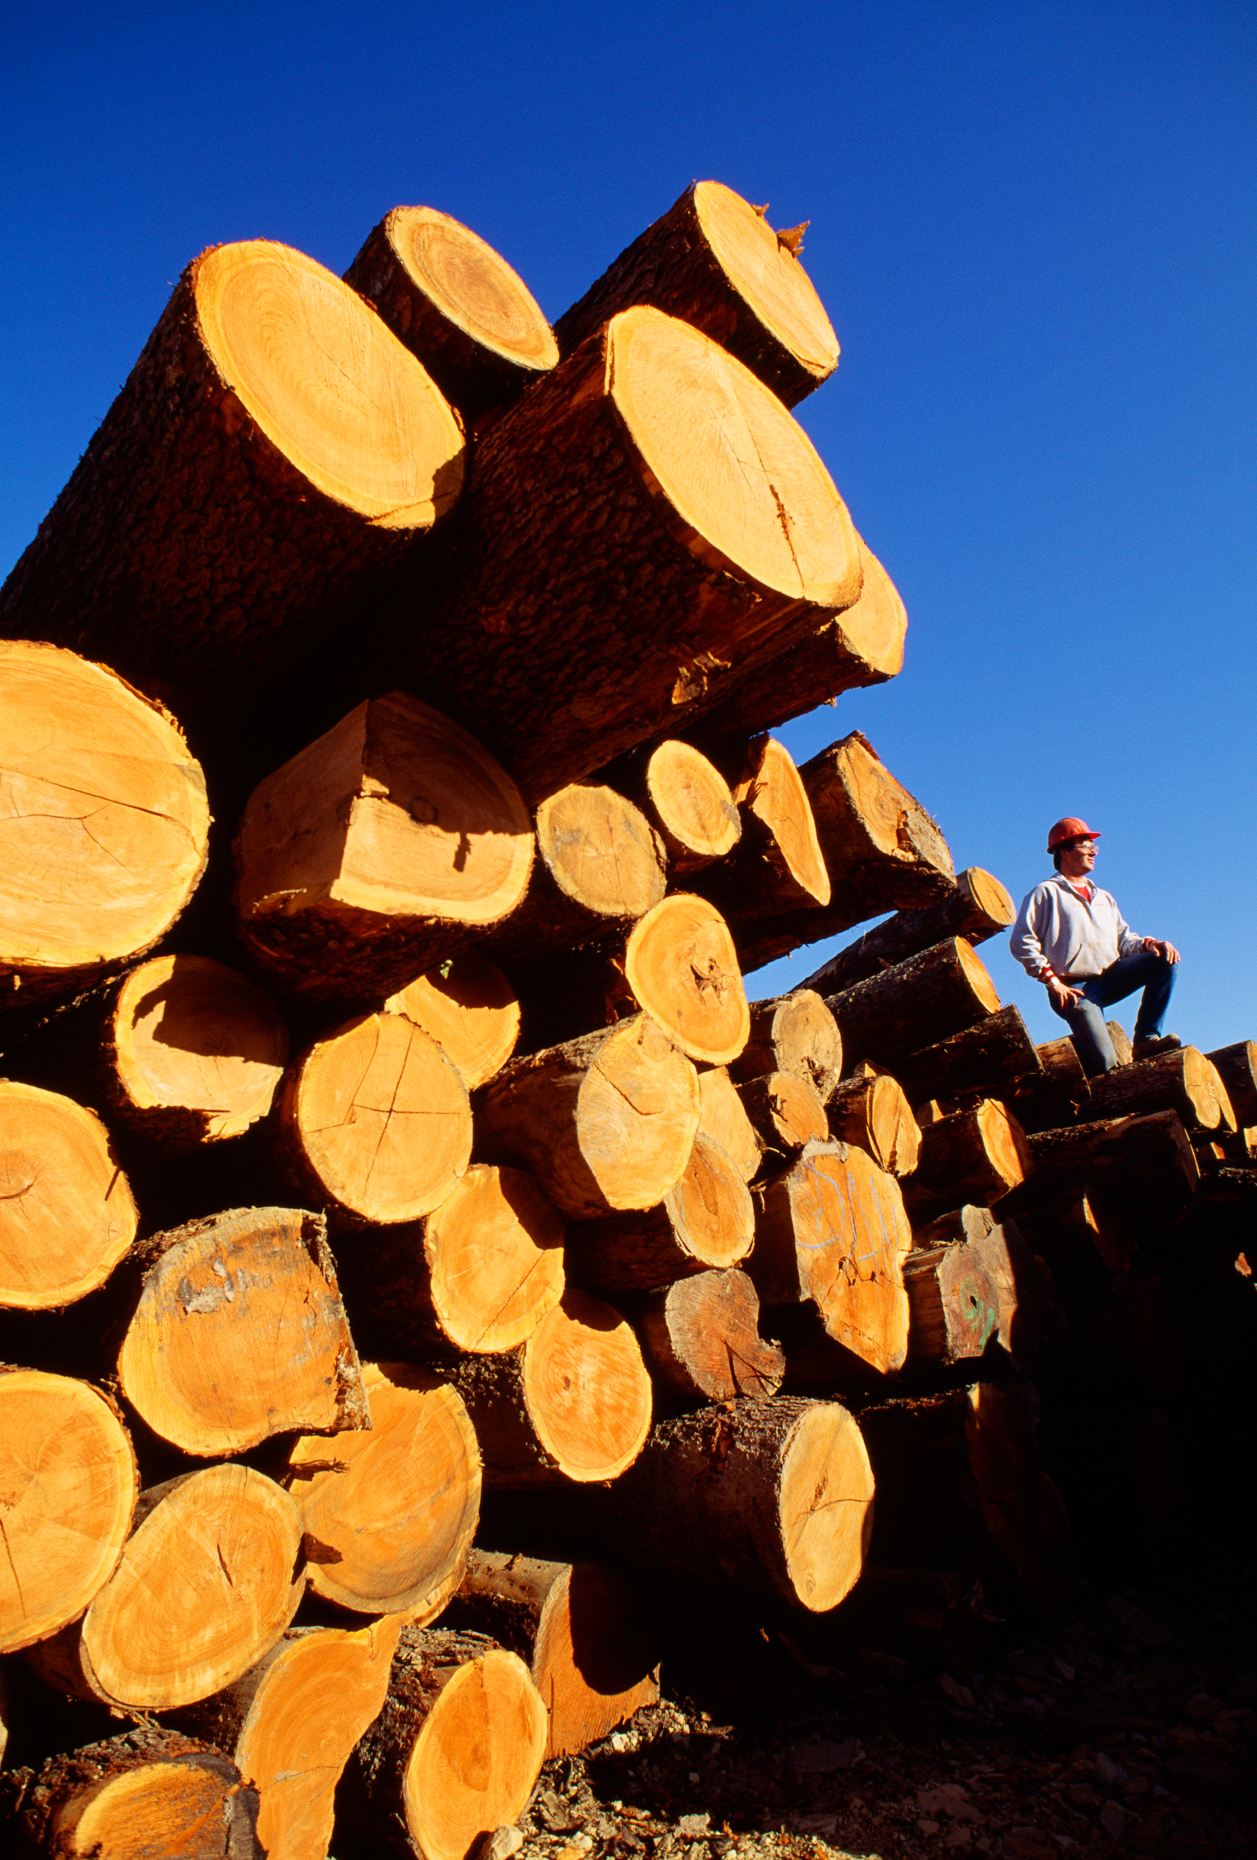 A worker pauses on top of a large pile of freshly cut logs, Kane Hardwoods, producers of top grade hardwoods, Kane, McKean County, Pennsylvania, USA